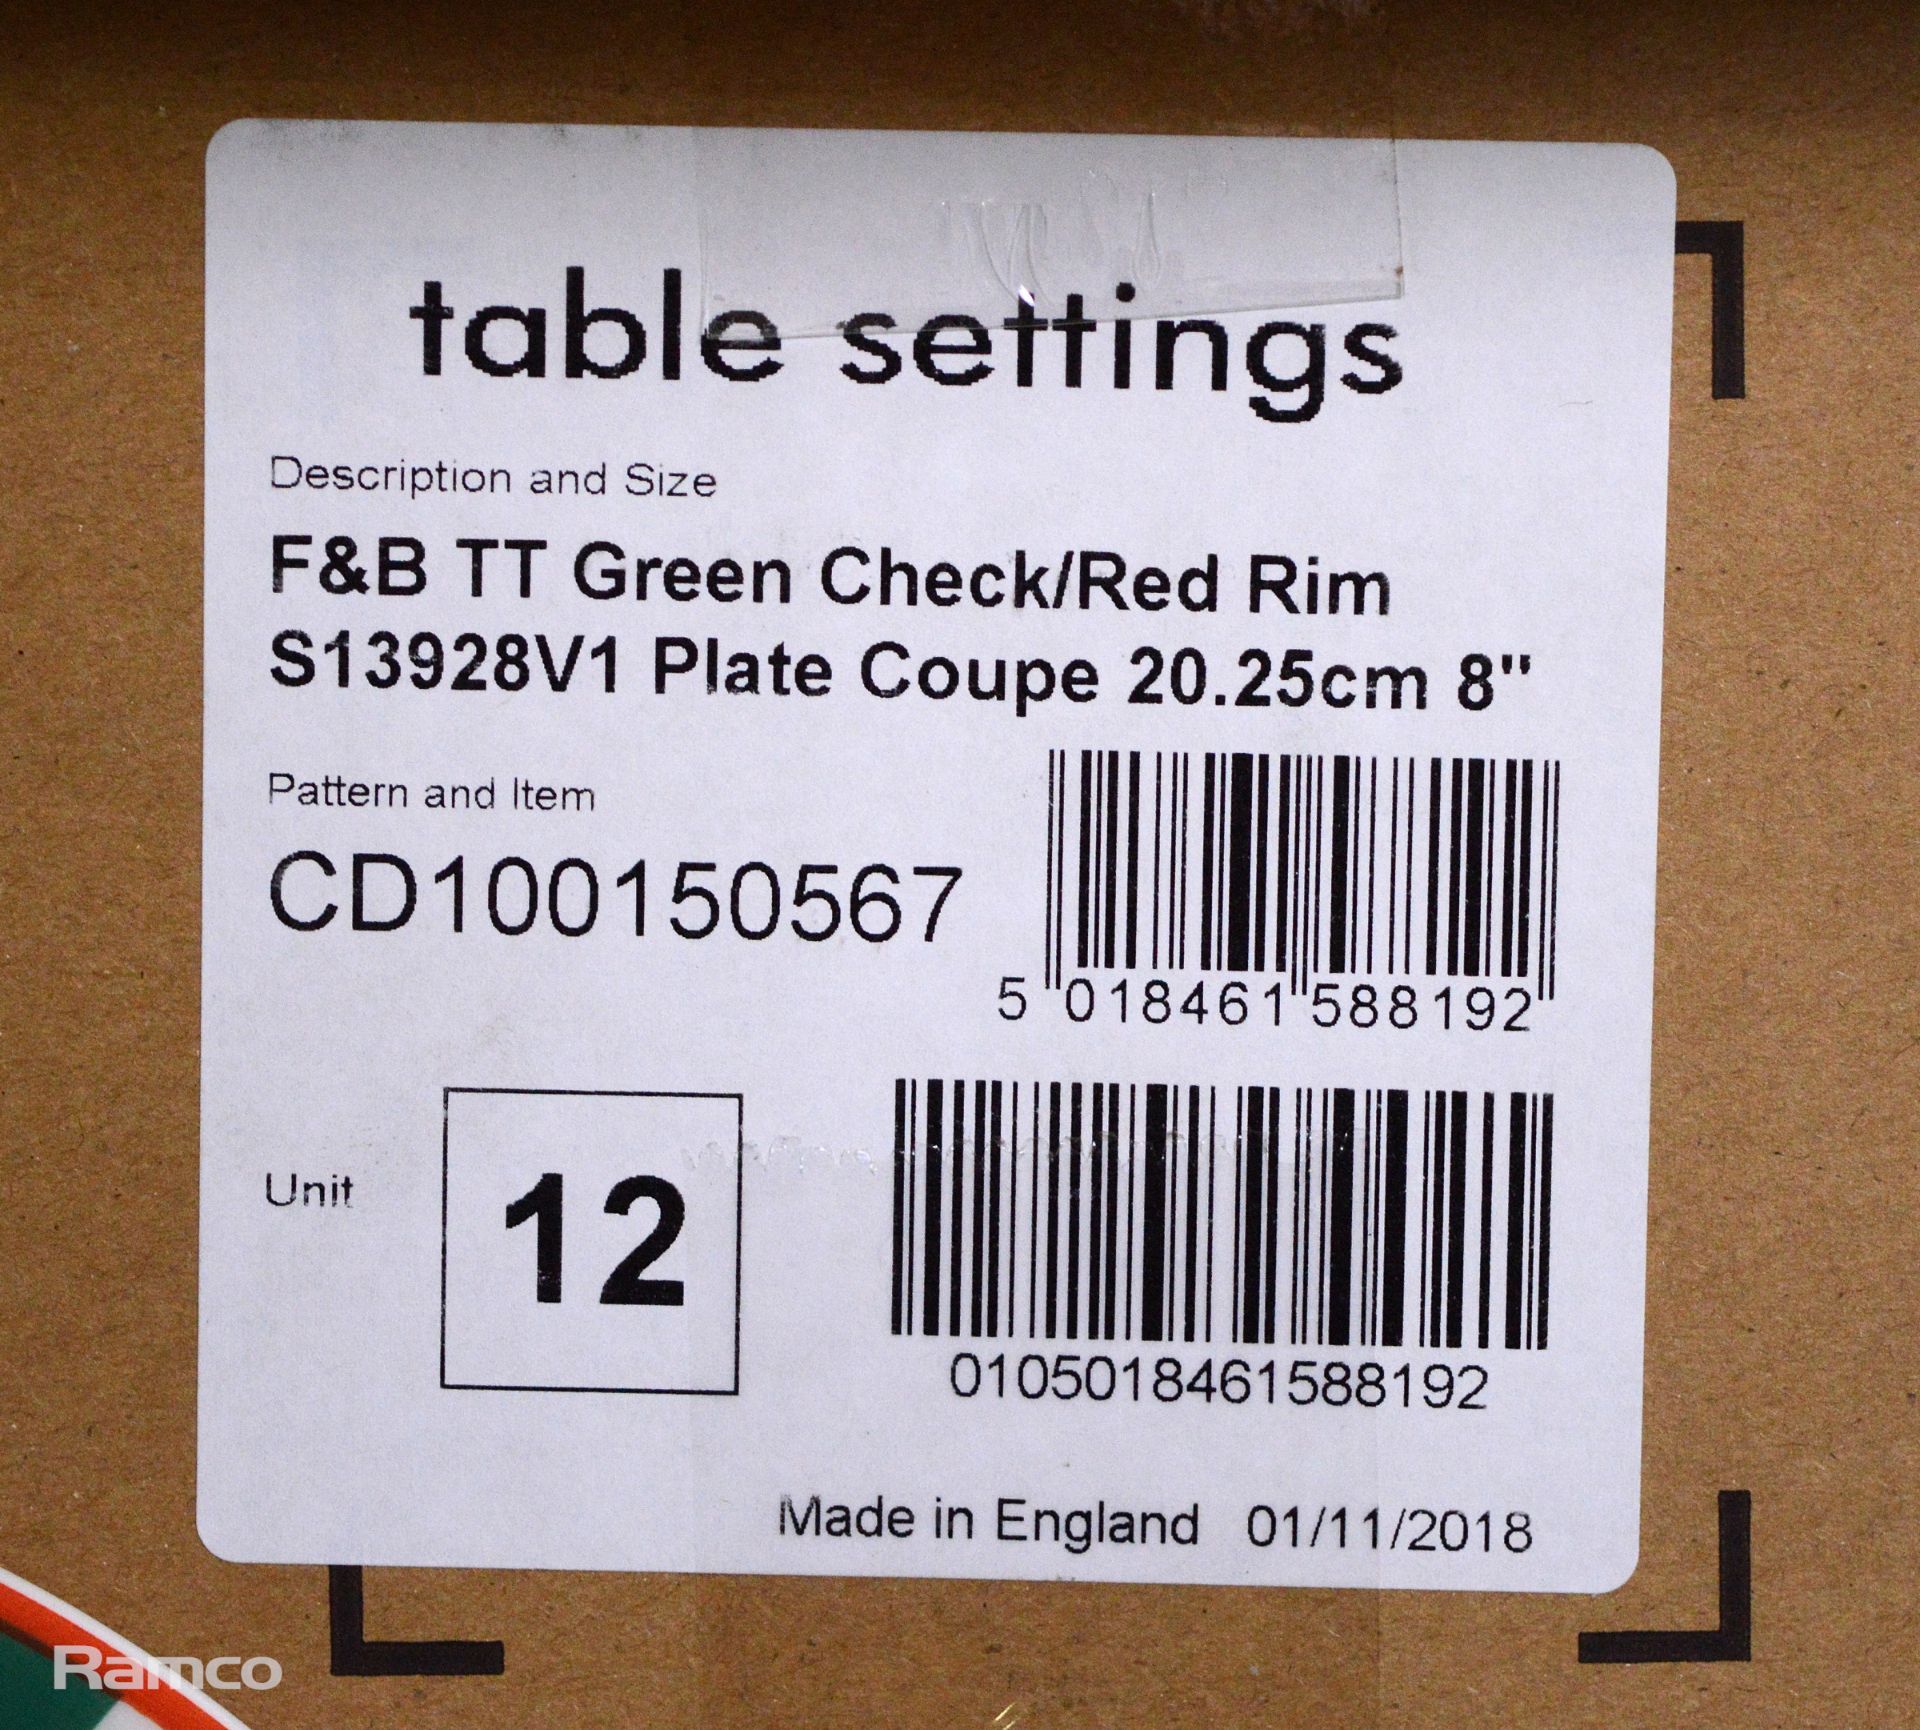 6x Box of 12 green check/red rim coupe plates 20.25cm/8in diameter - Image 3 of 3